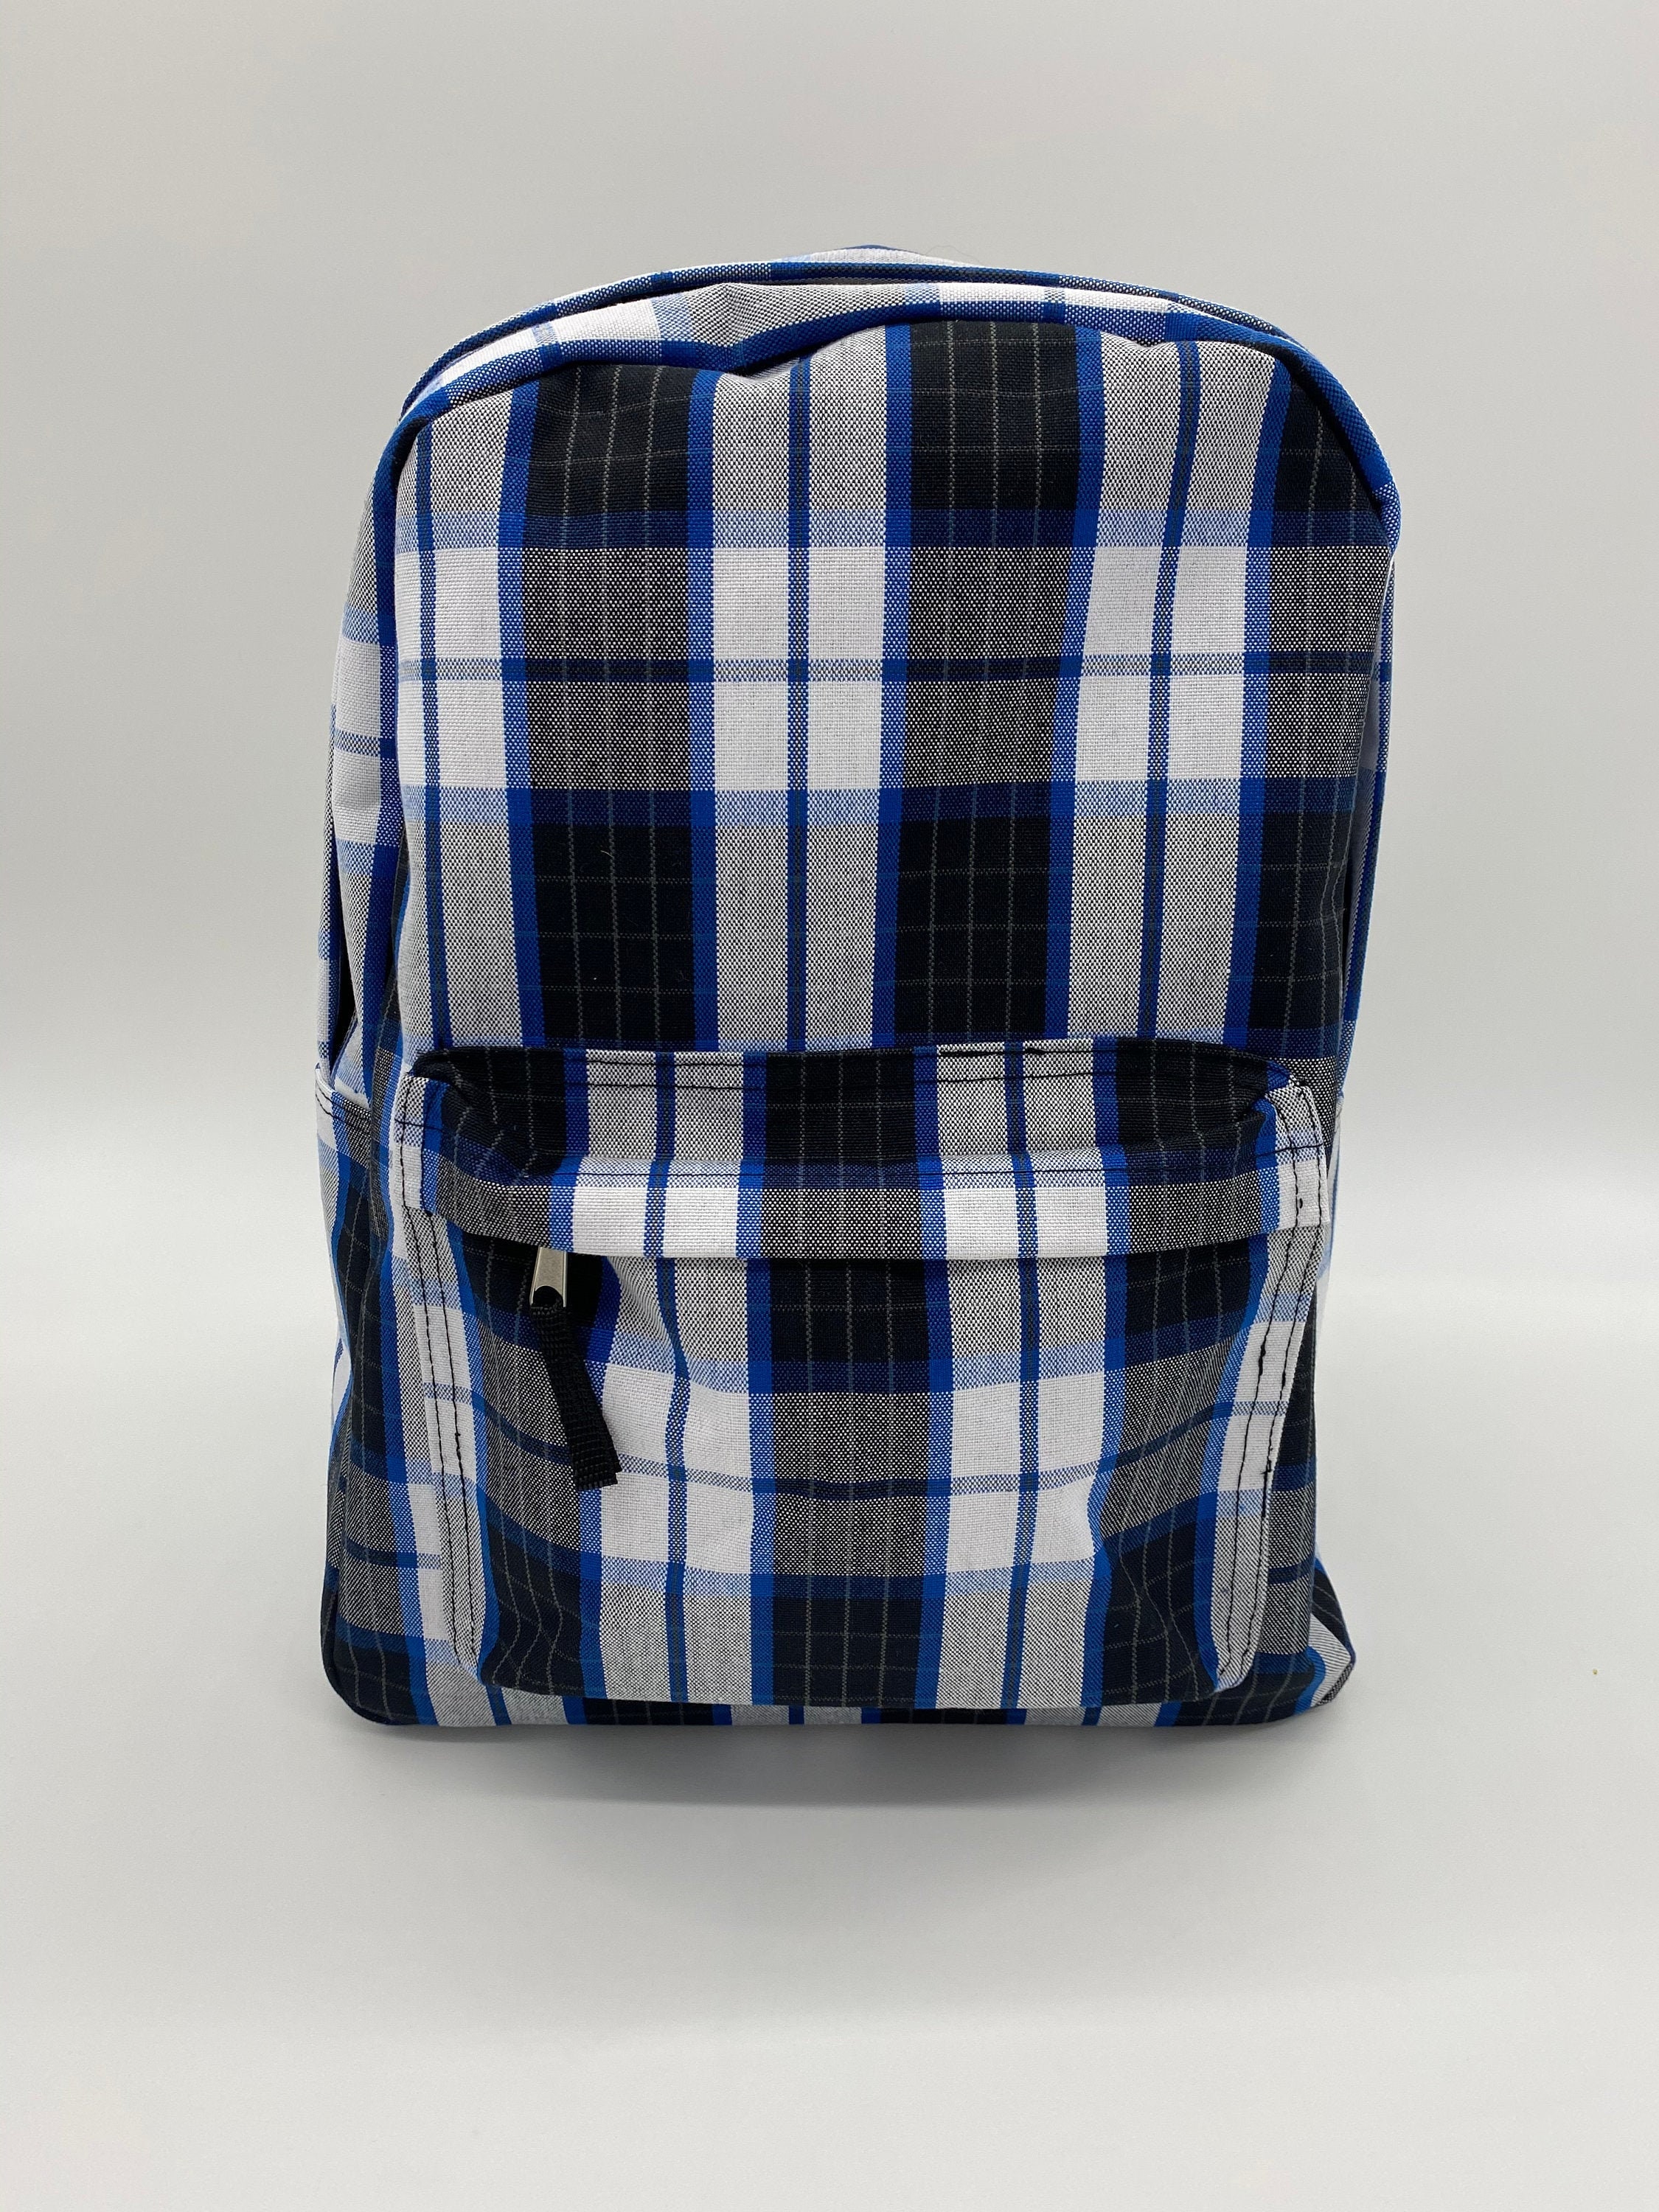 School Uniform Plaid Backpack/Back to School/Sport Backpack/Travel Backpack/Adults and Kids/Unisex/Red,Blue,Yellow/ Ford Plaid 94 